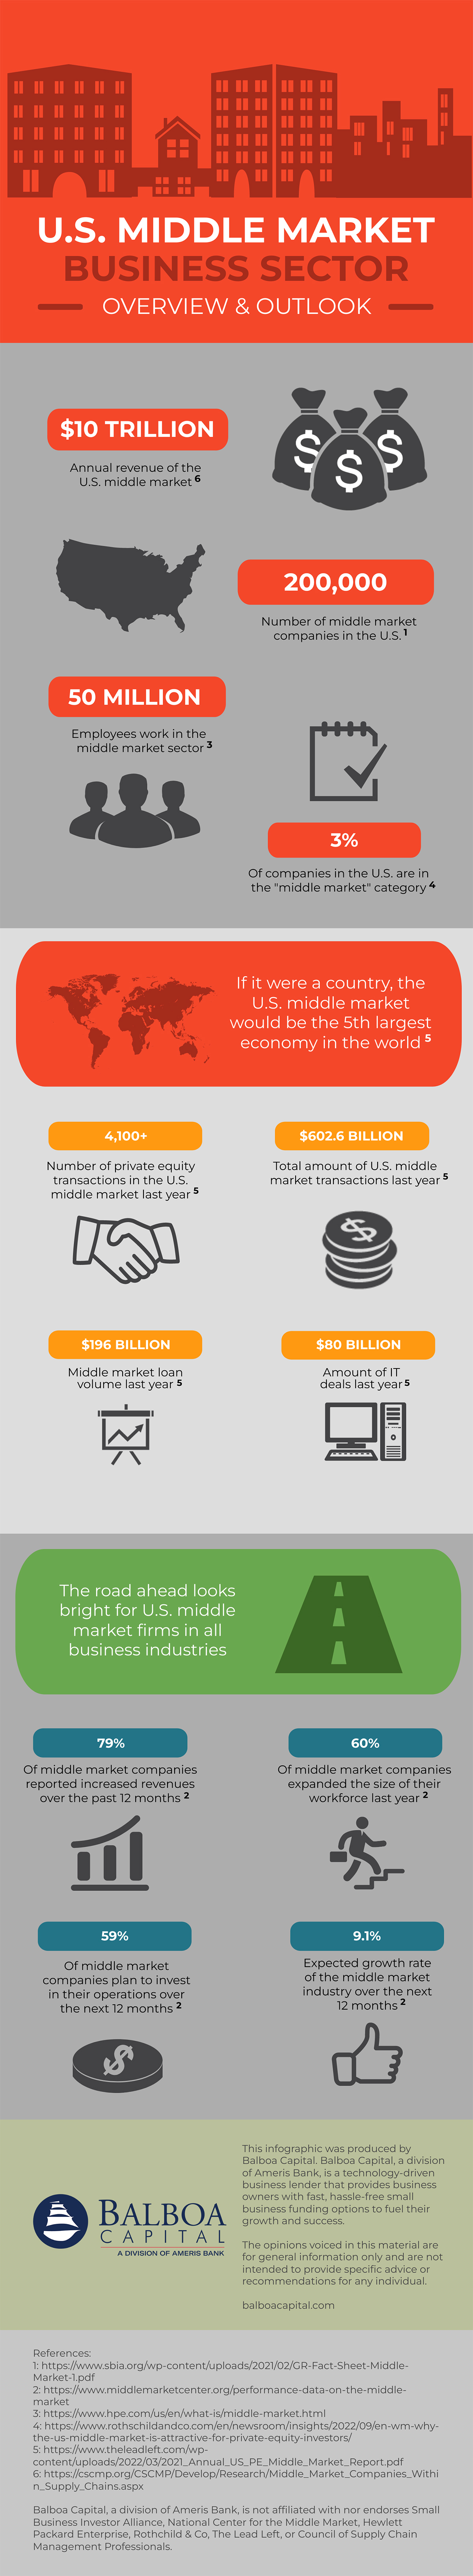 Middle Market Industry Infographic